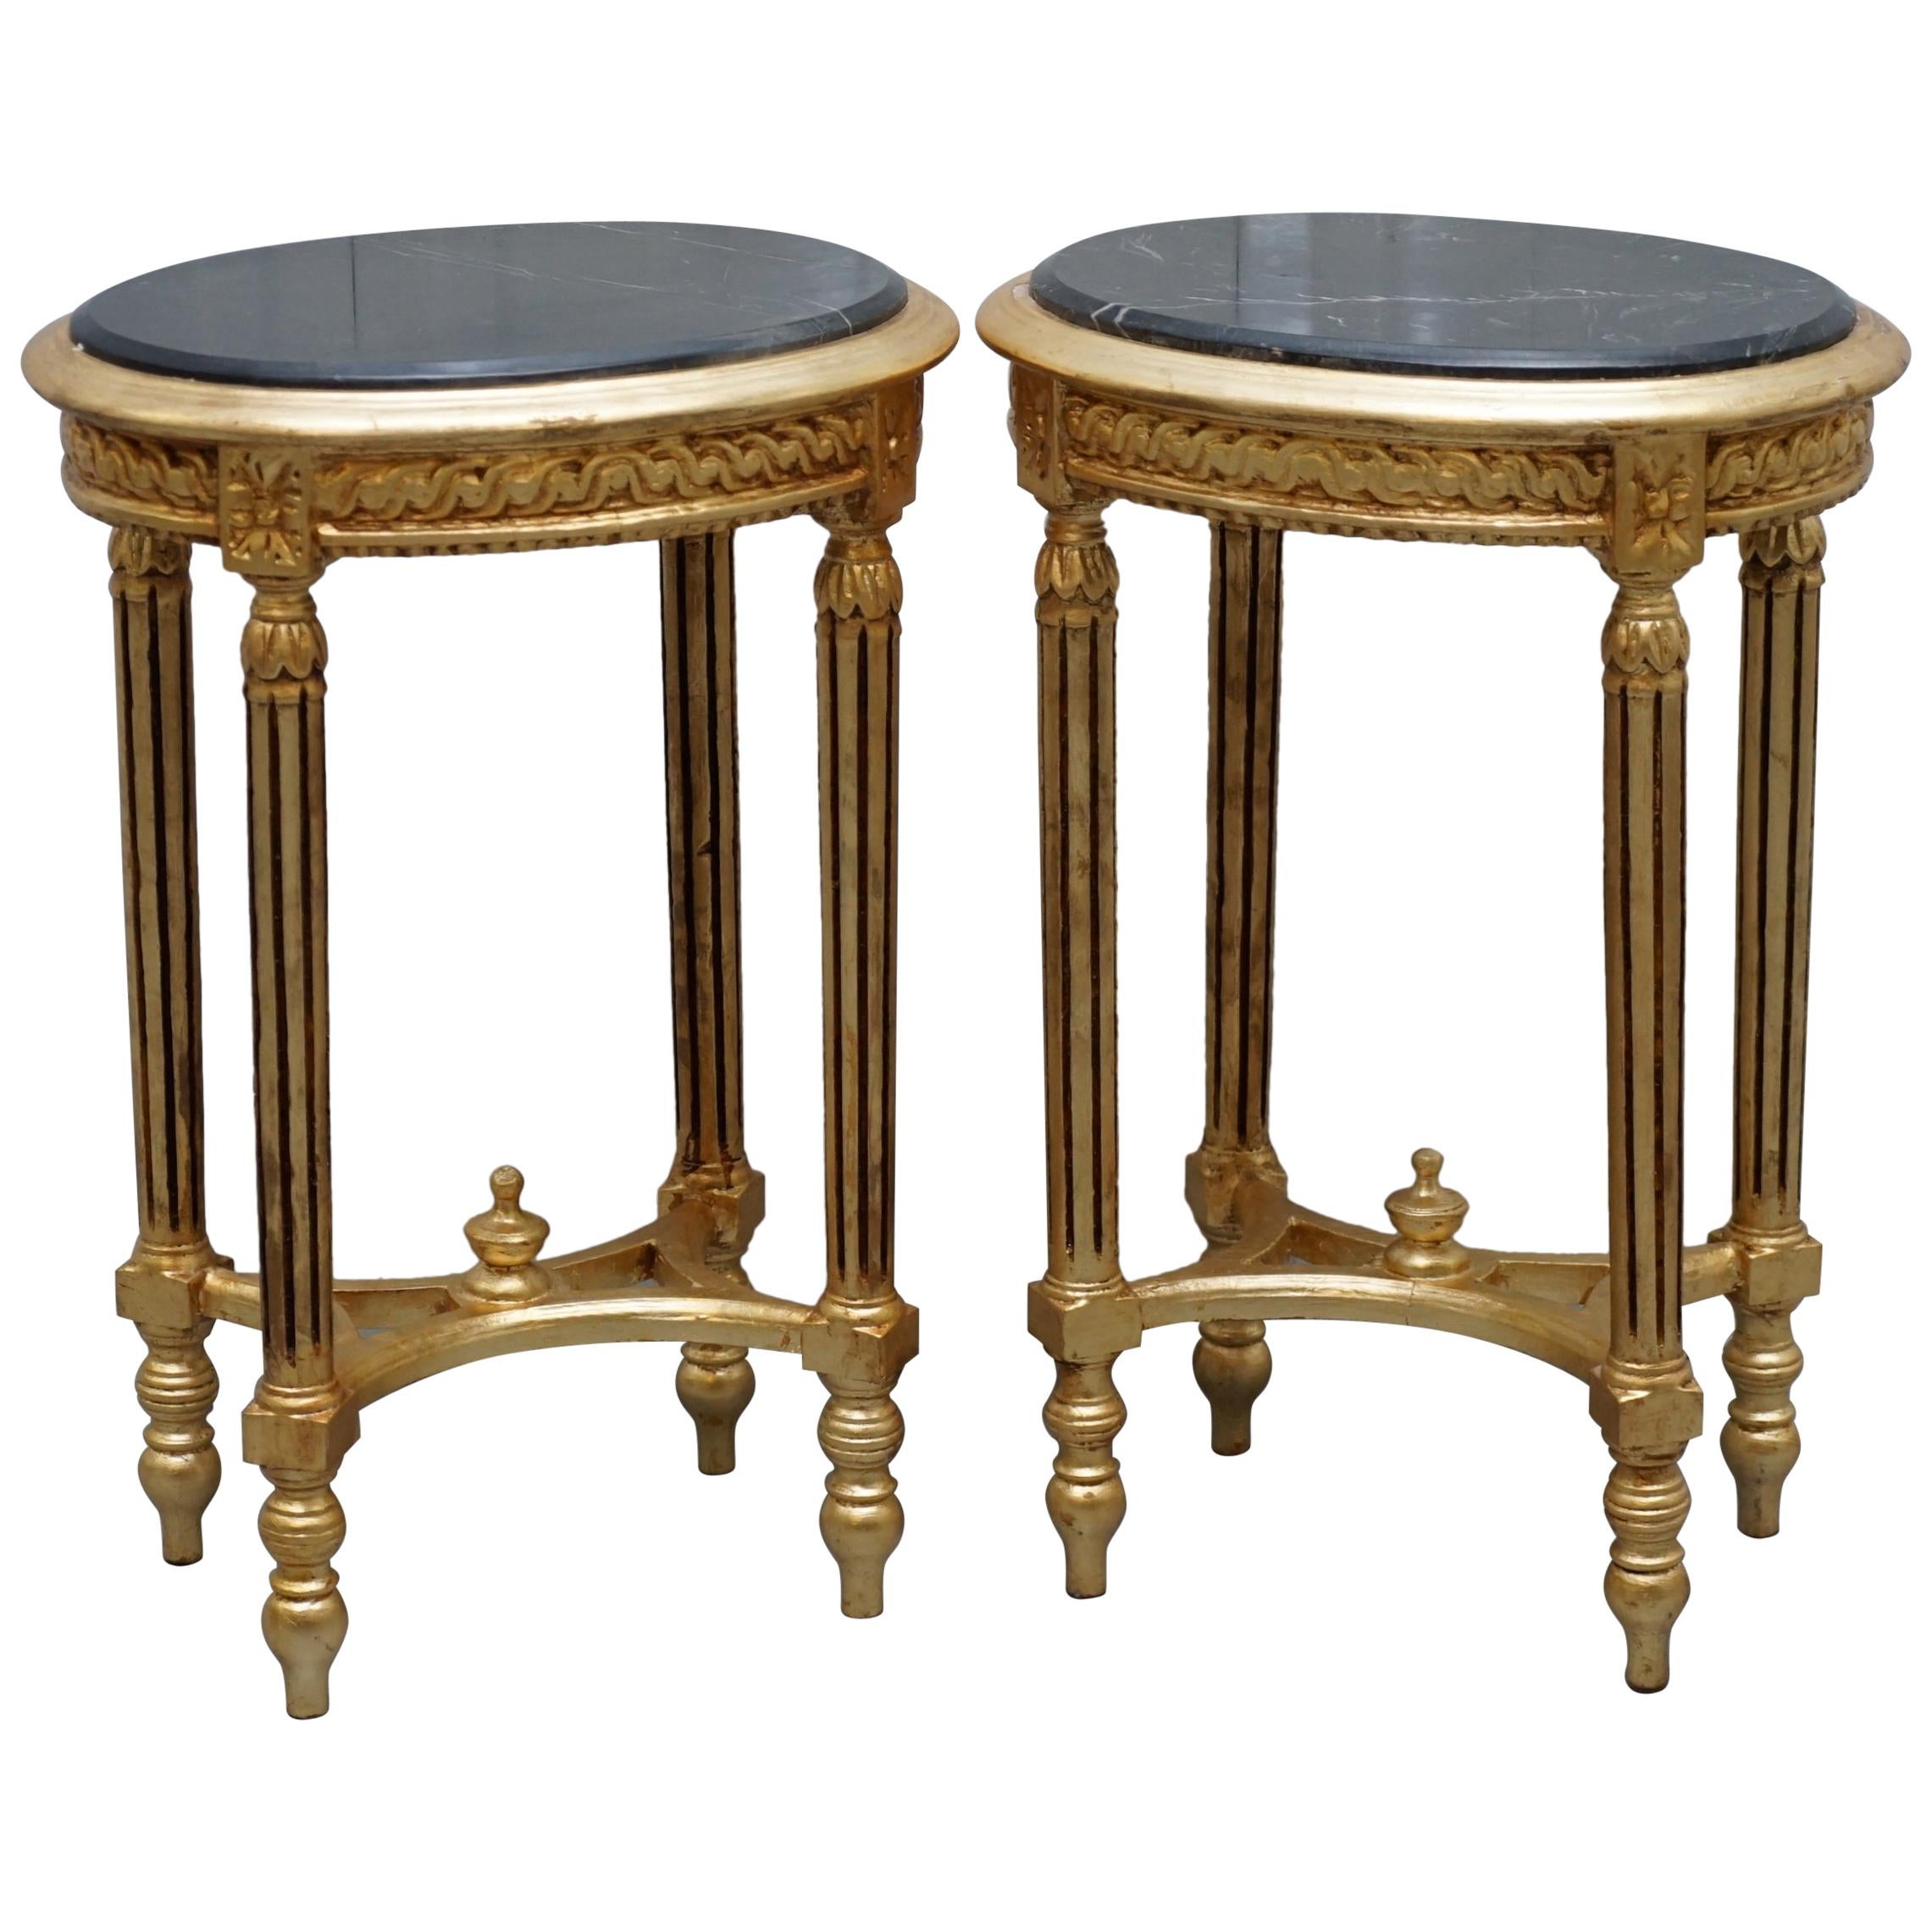 Stunning Pair of Antique French Gold Giltwood & Marble Jardiniere Display Stands